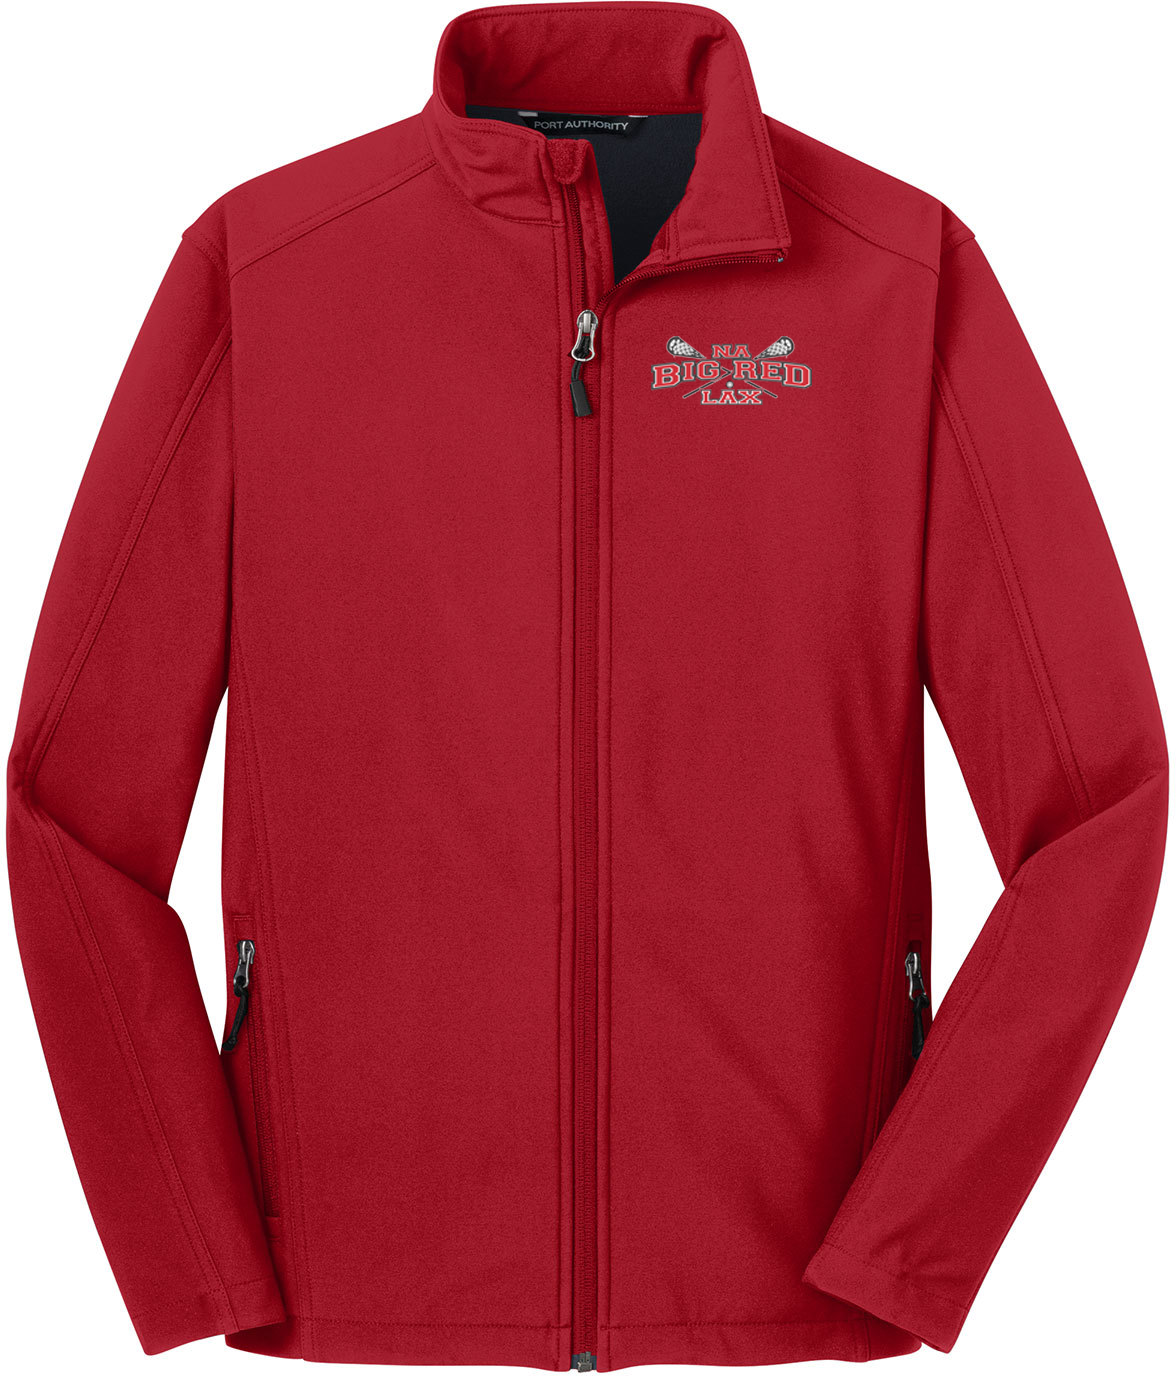 NA Big Red Lax Men's Red Soft Shell Jacket